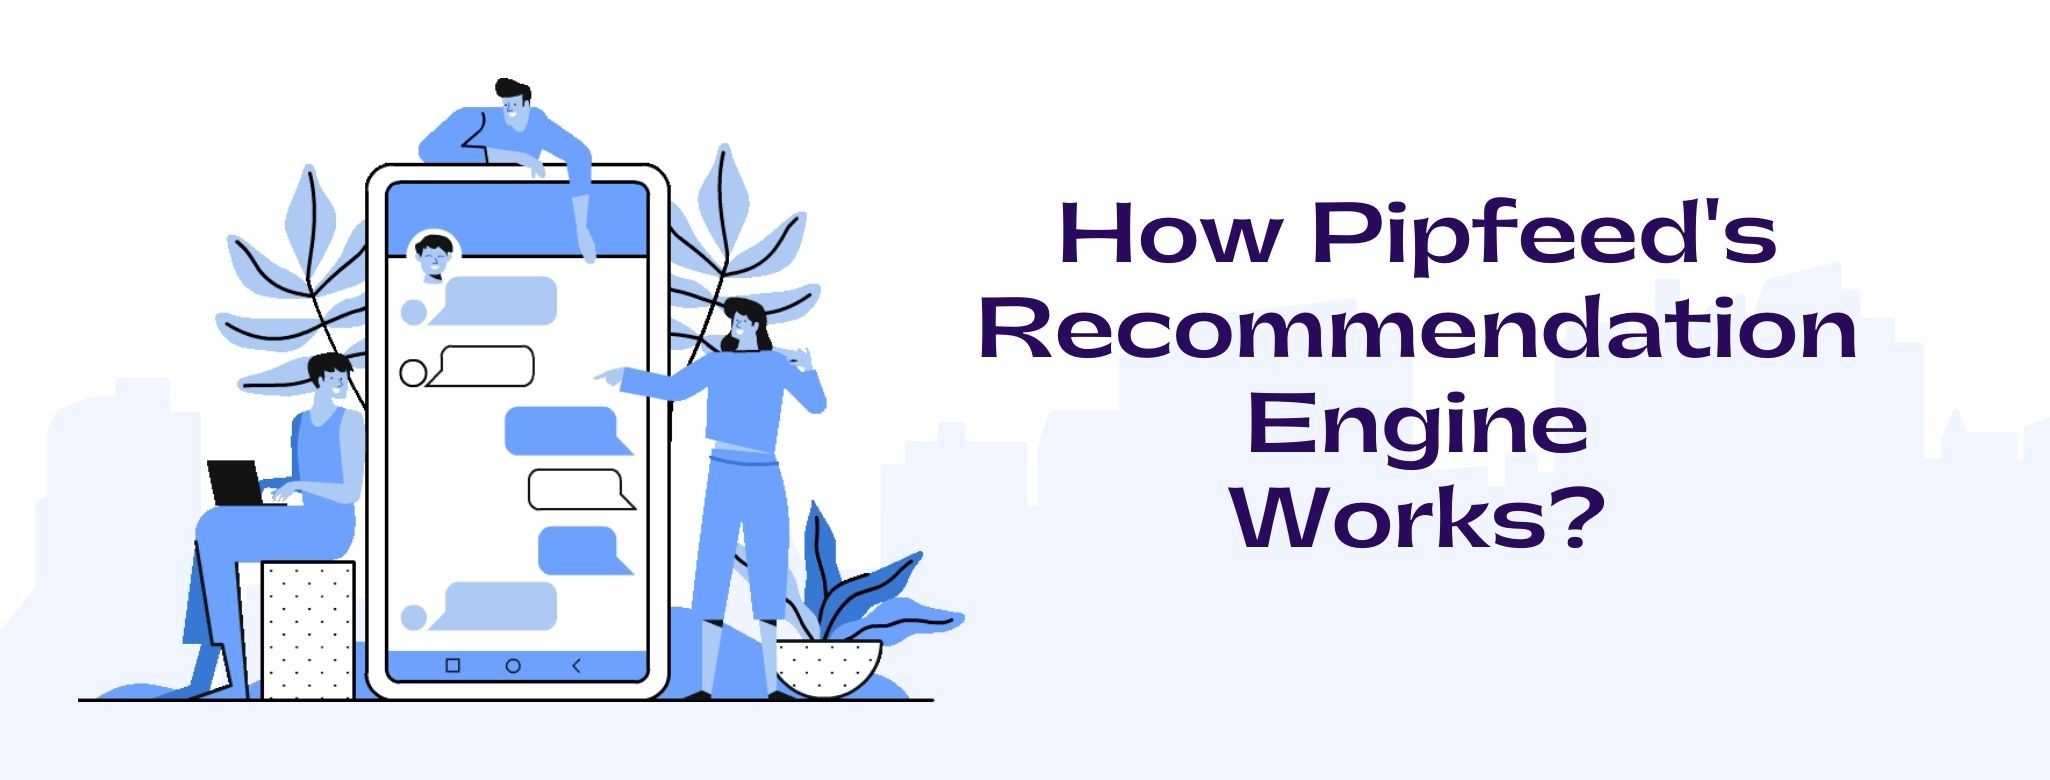 How does Pipfeed’s recommendation Engine work?